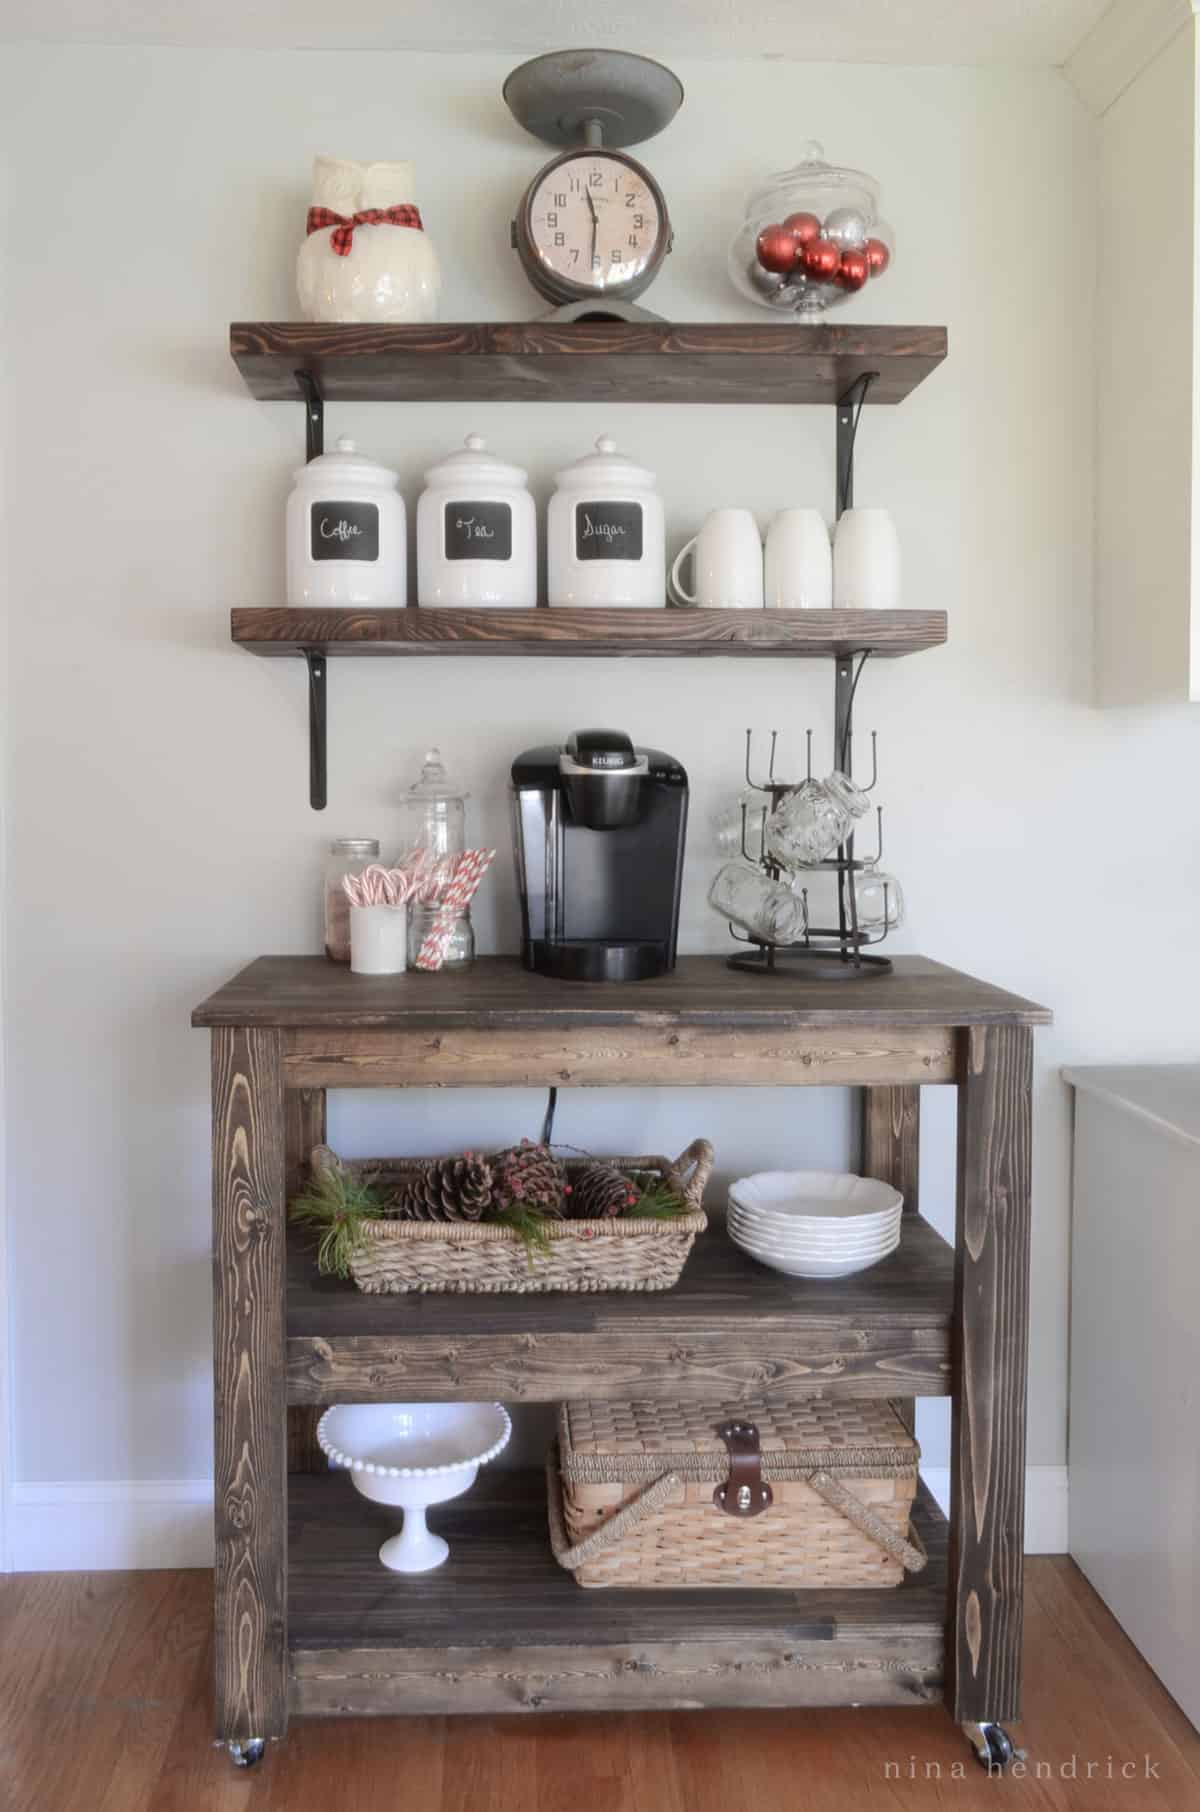 Coffee Bar Ideas: How to Create a Coffee Bar Area in Your Kitchen